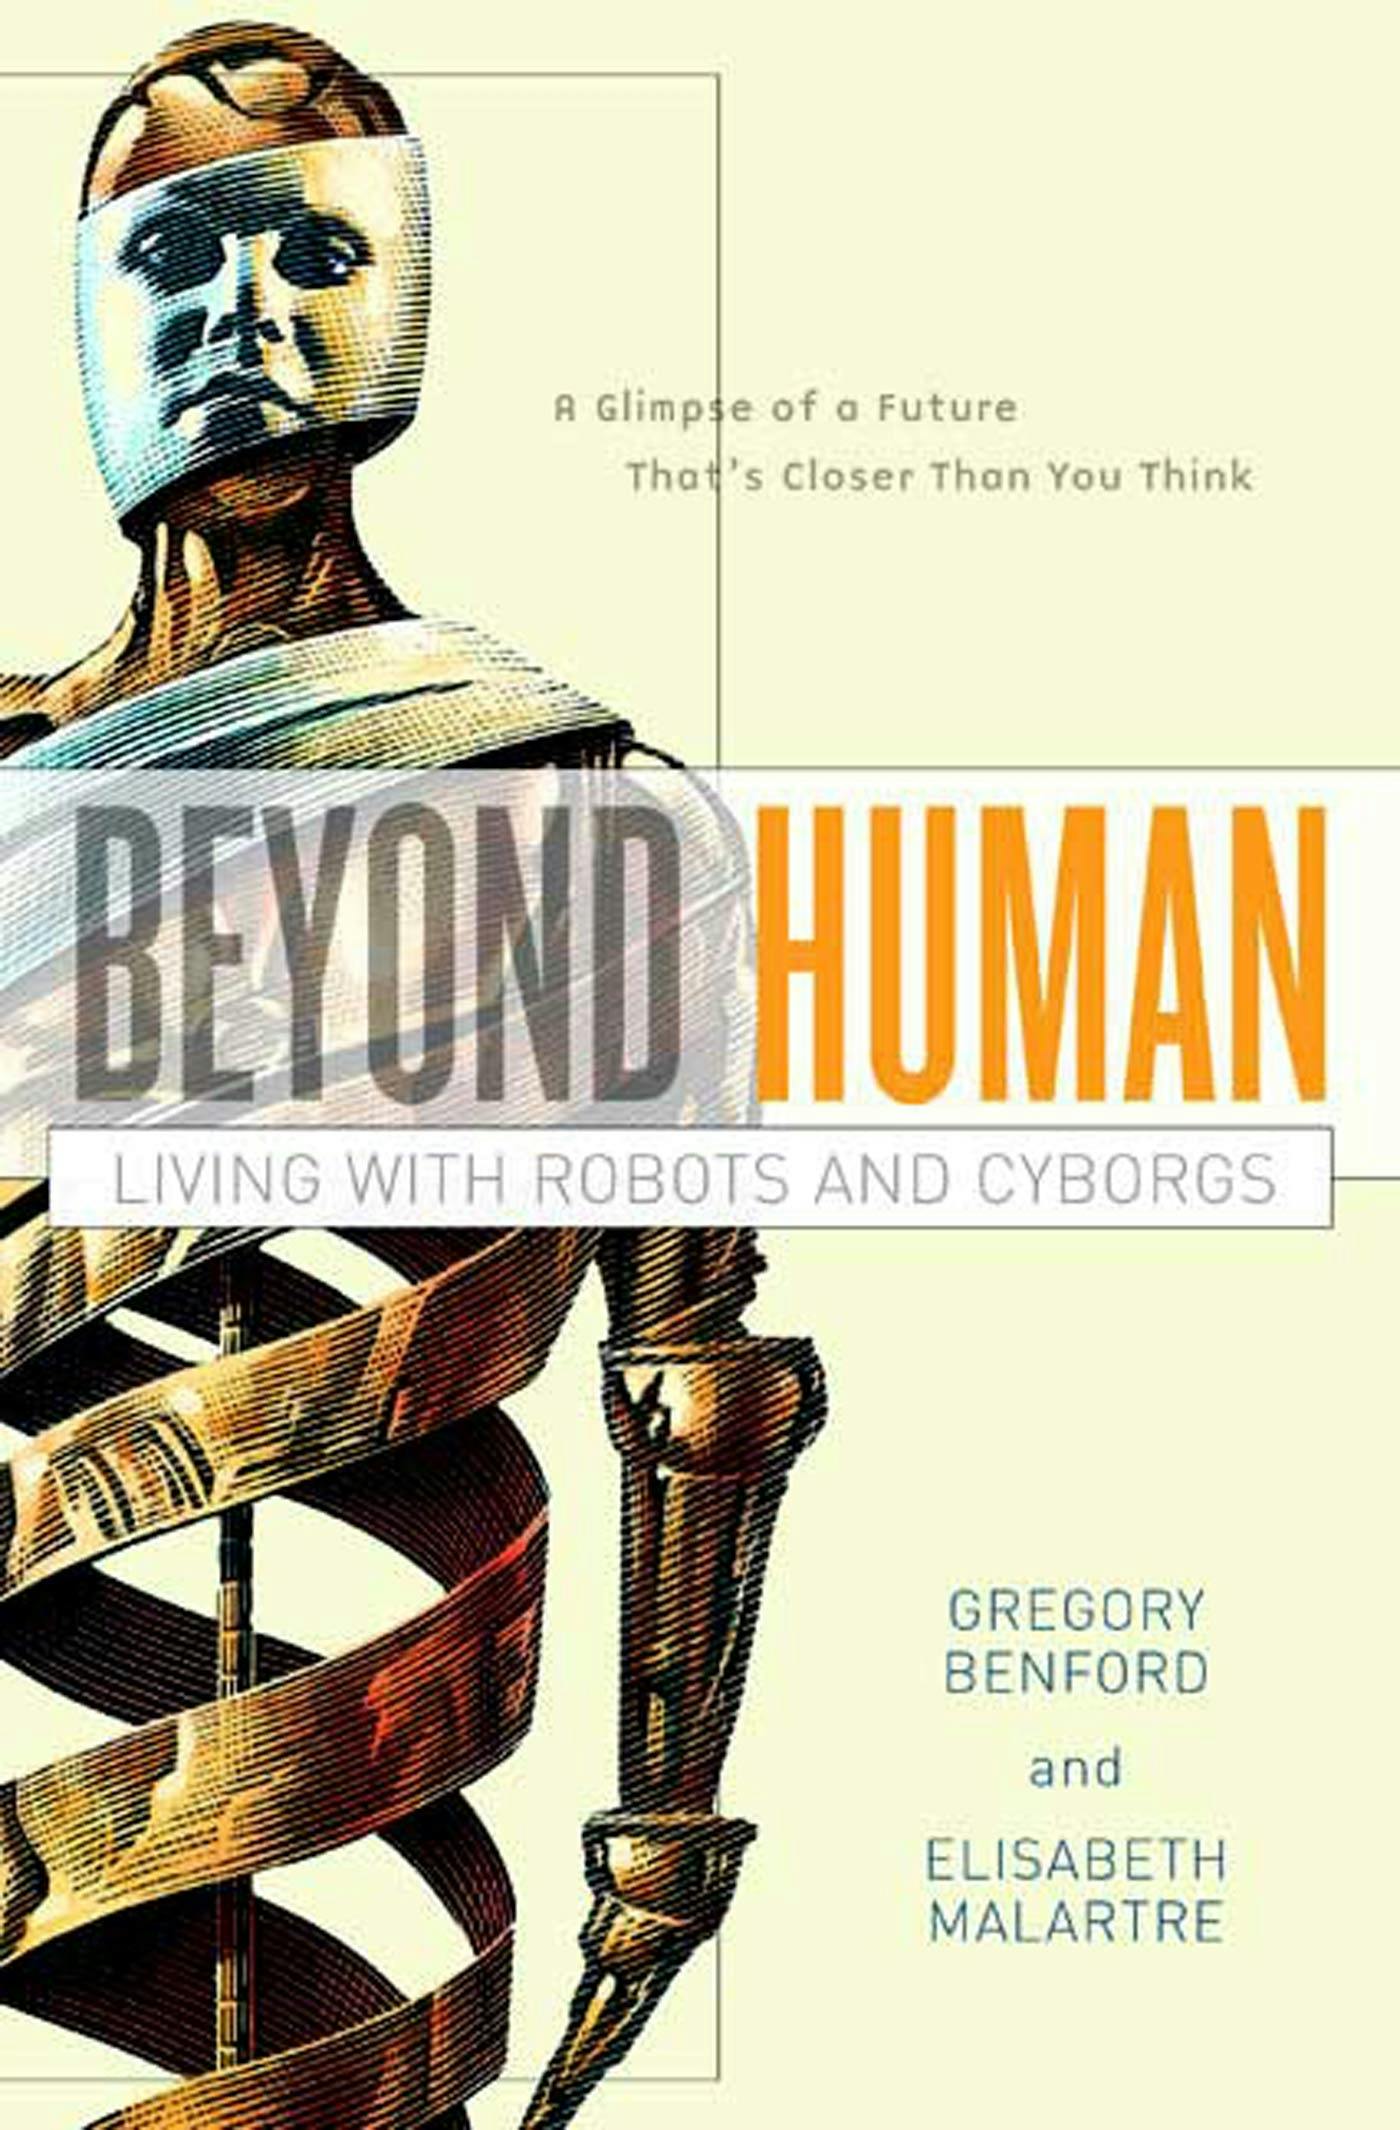 Cover for the book titled as: Beyond Human